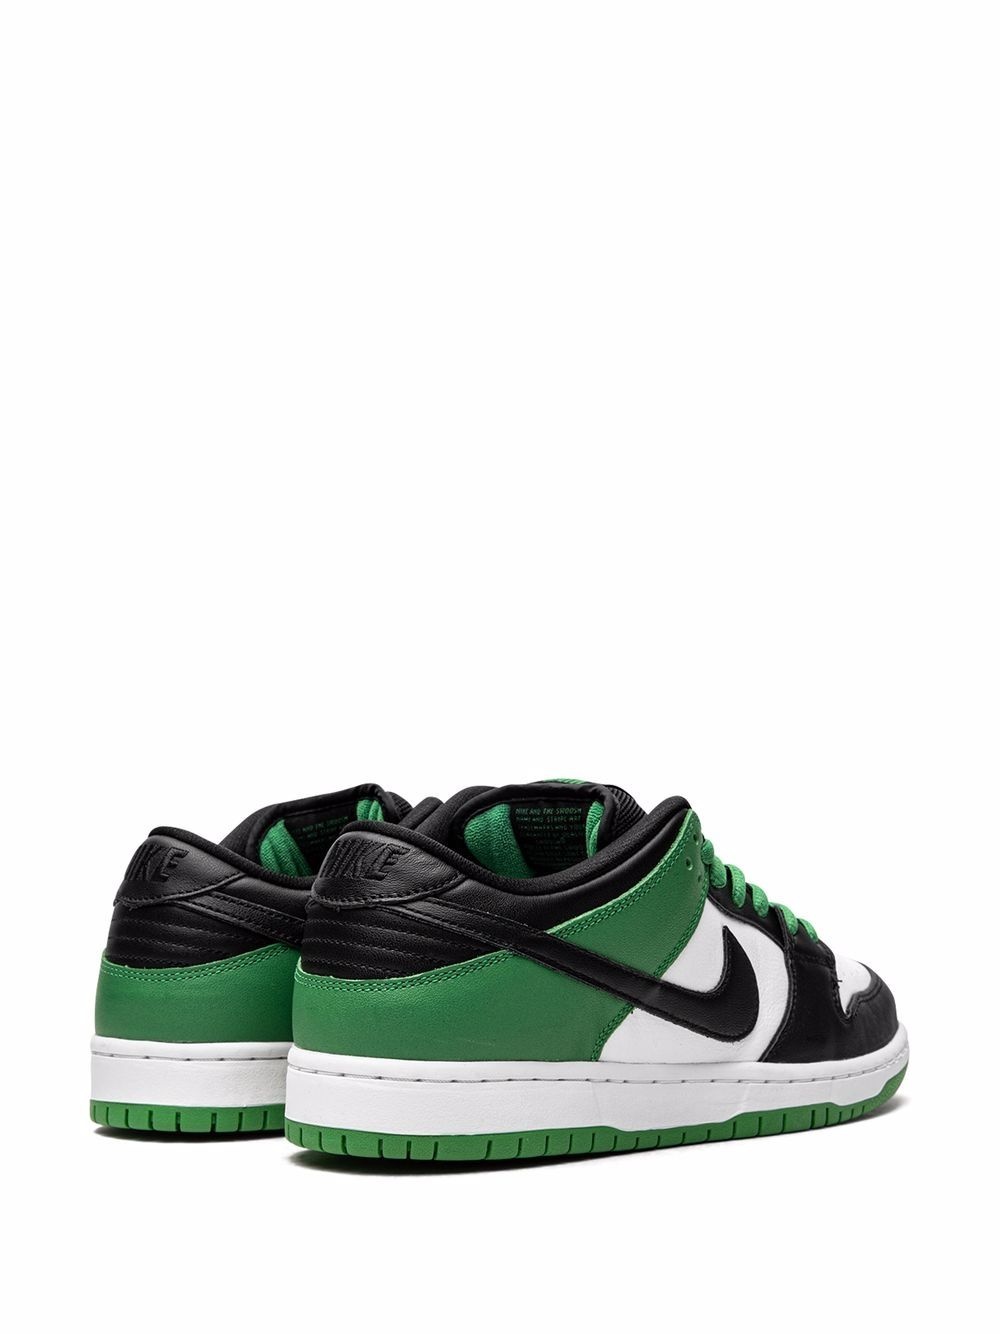 Dunk Low Pro SB "Classic Green" sneakers - 3